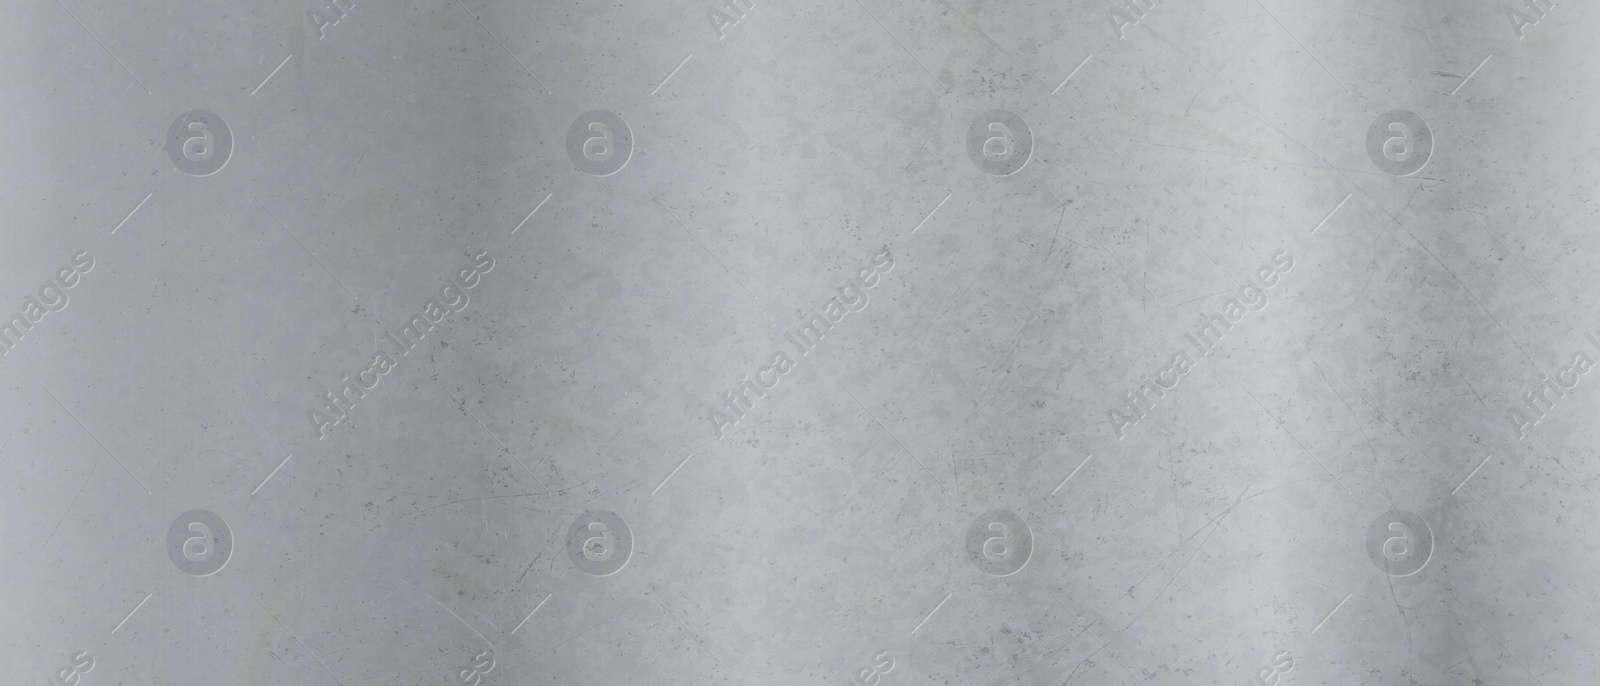 Image of Shiny silver surface as background, closeup view